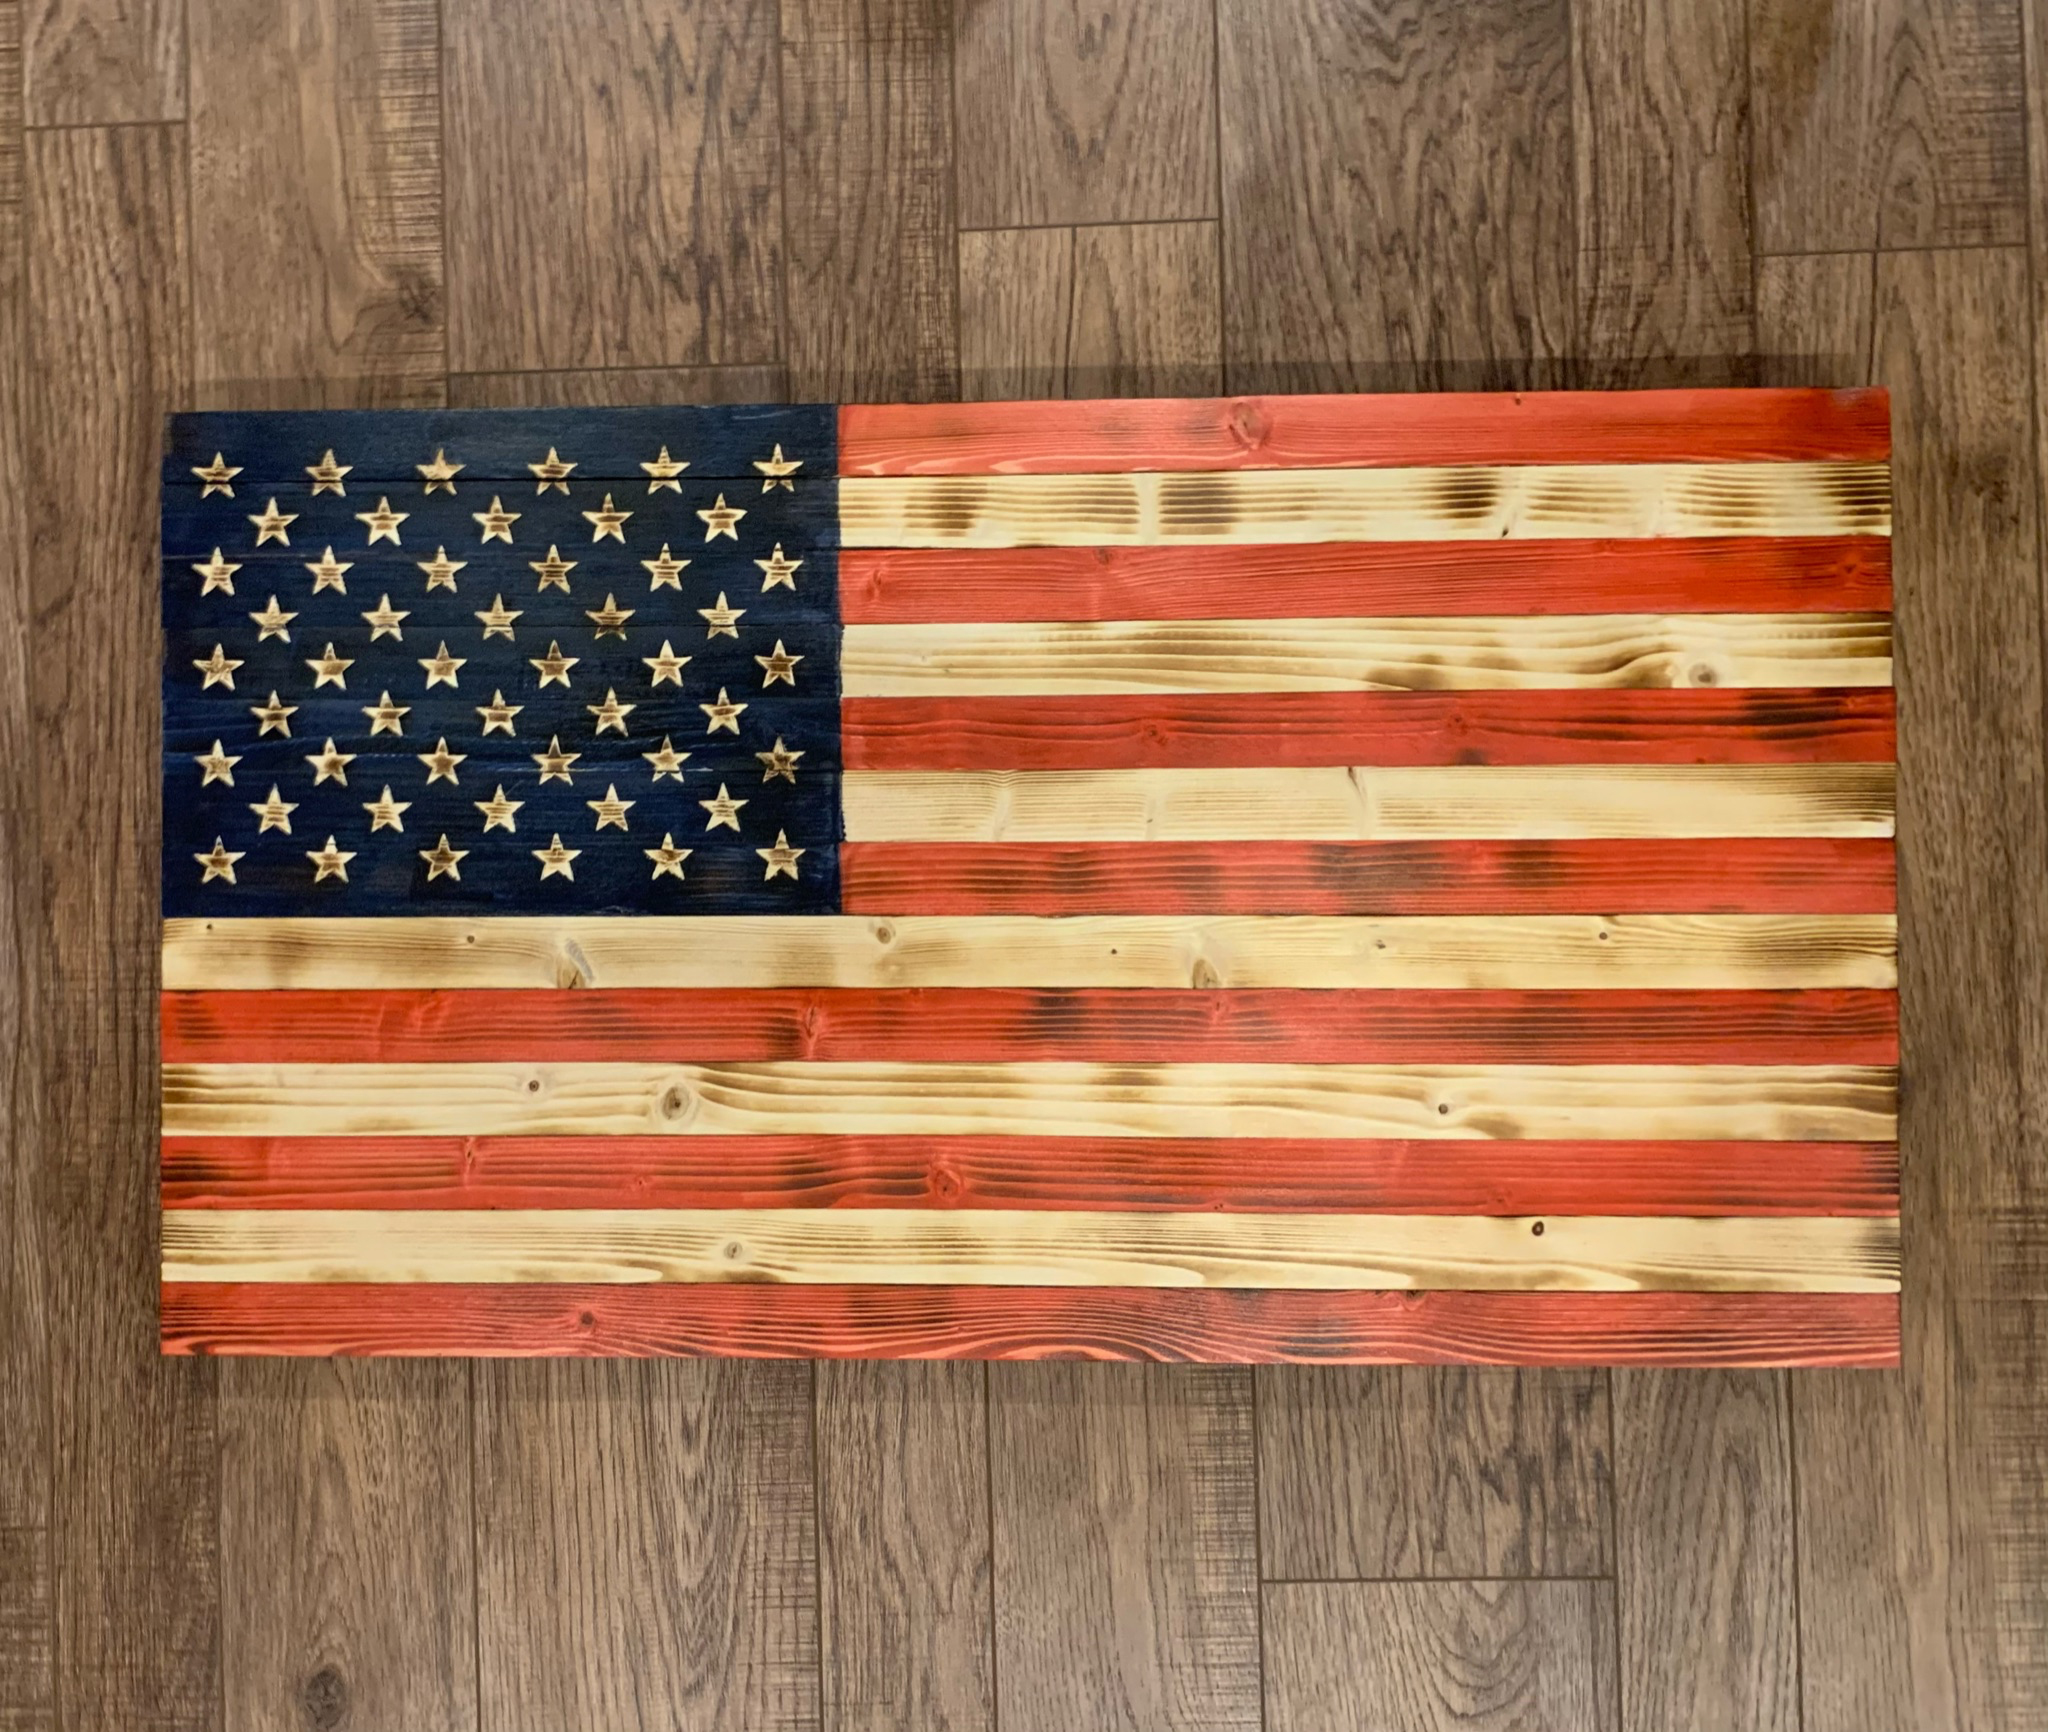 37"x19" Handmade Carved Stars Wooden American Flag Rustic Old Glory